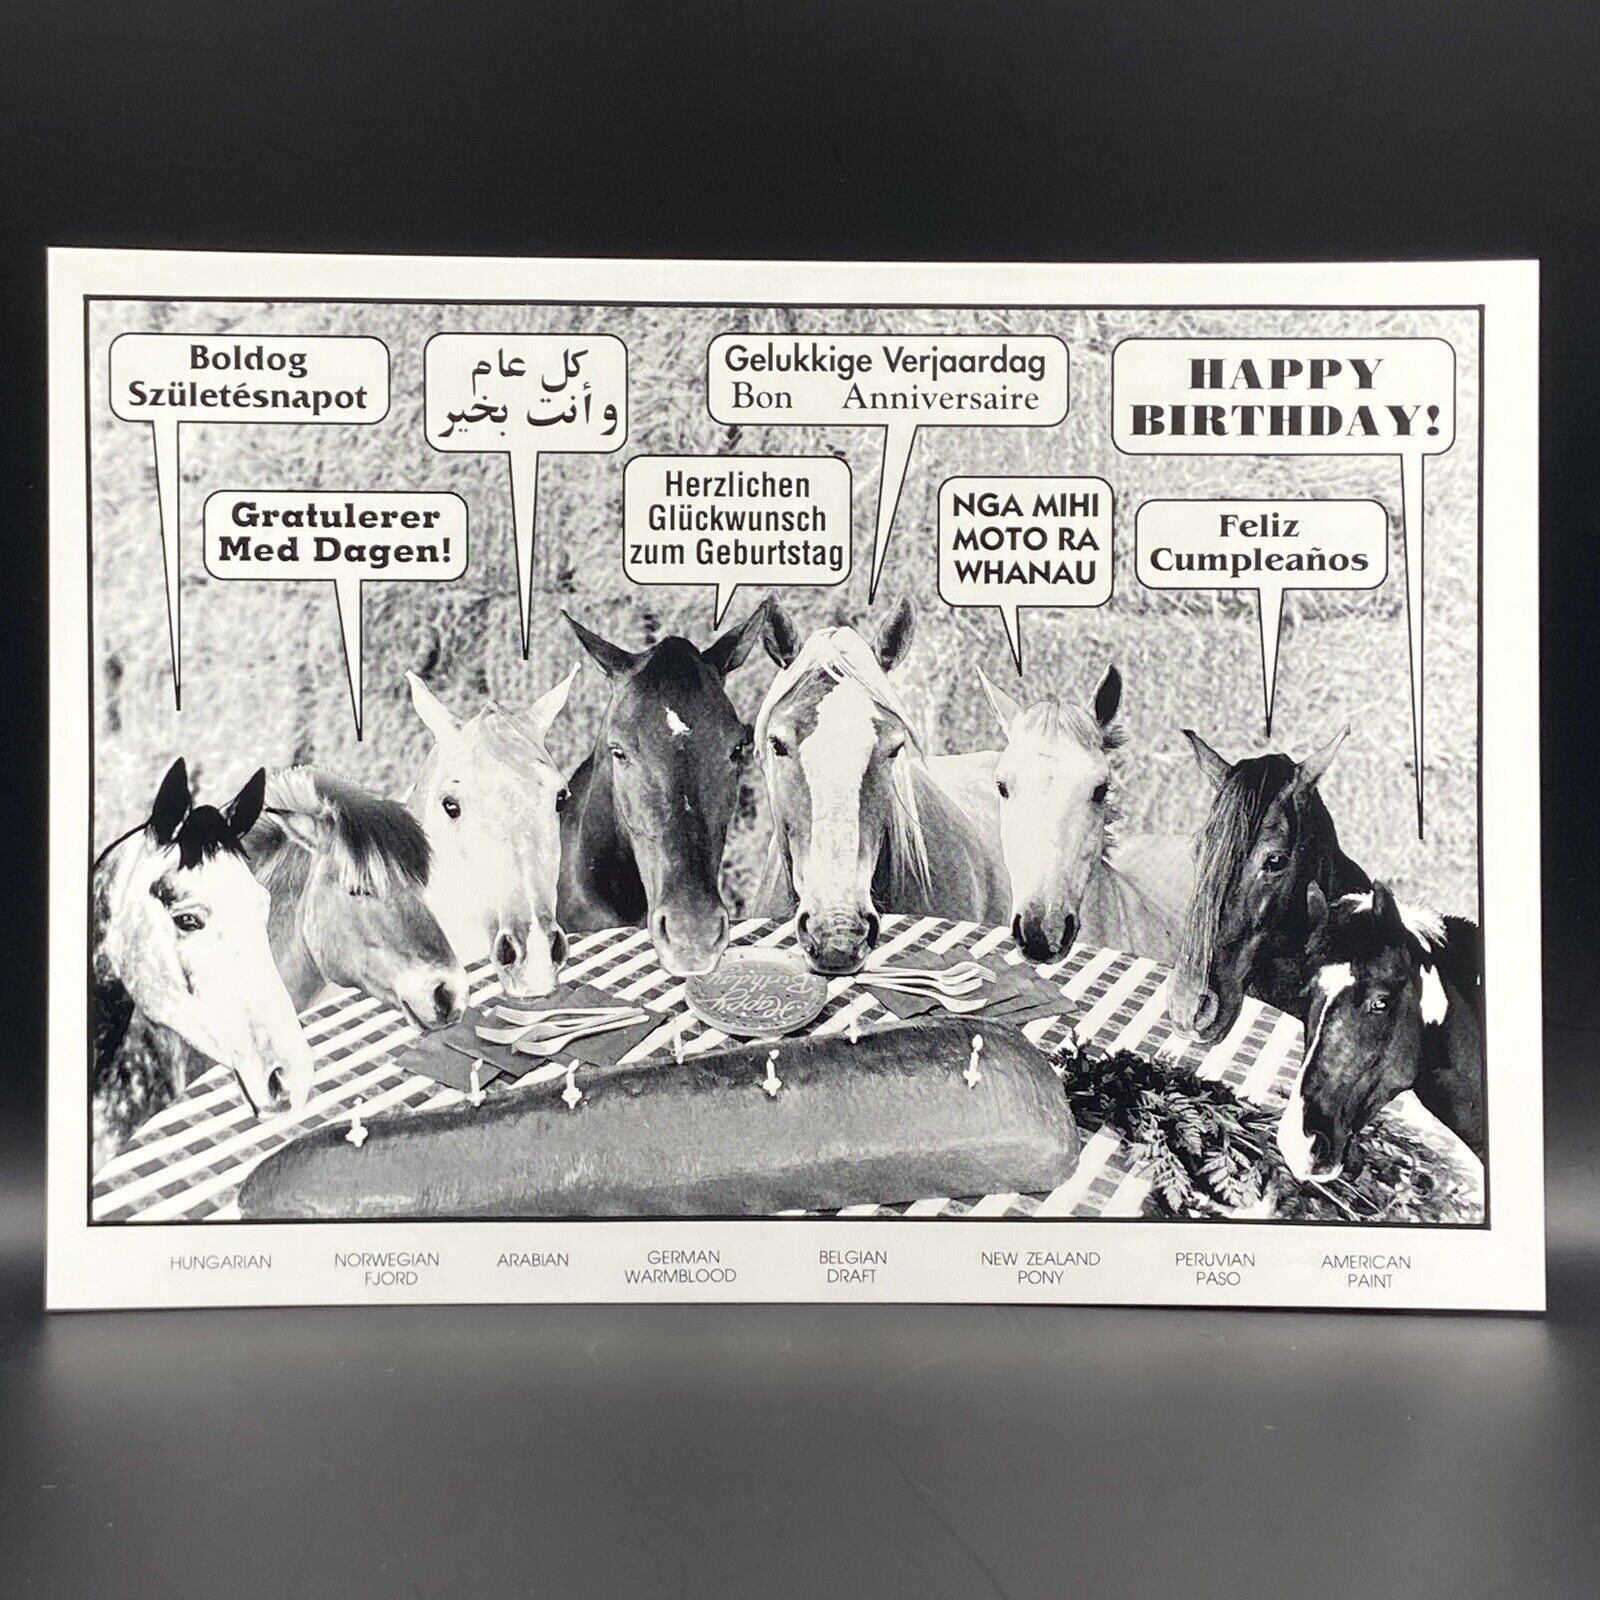 Funny Vintage Birthday Card with Horses - Happy Birthday In 8 Languages - b/w